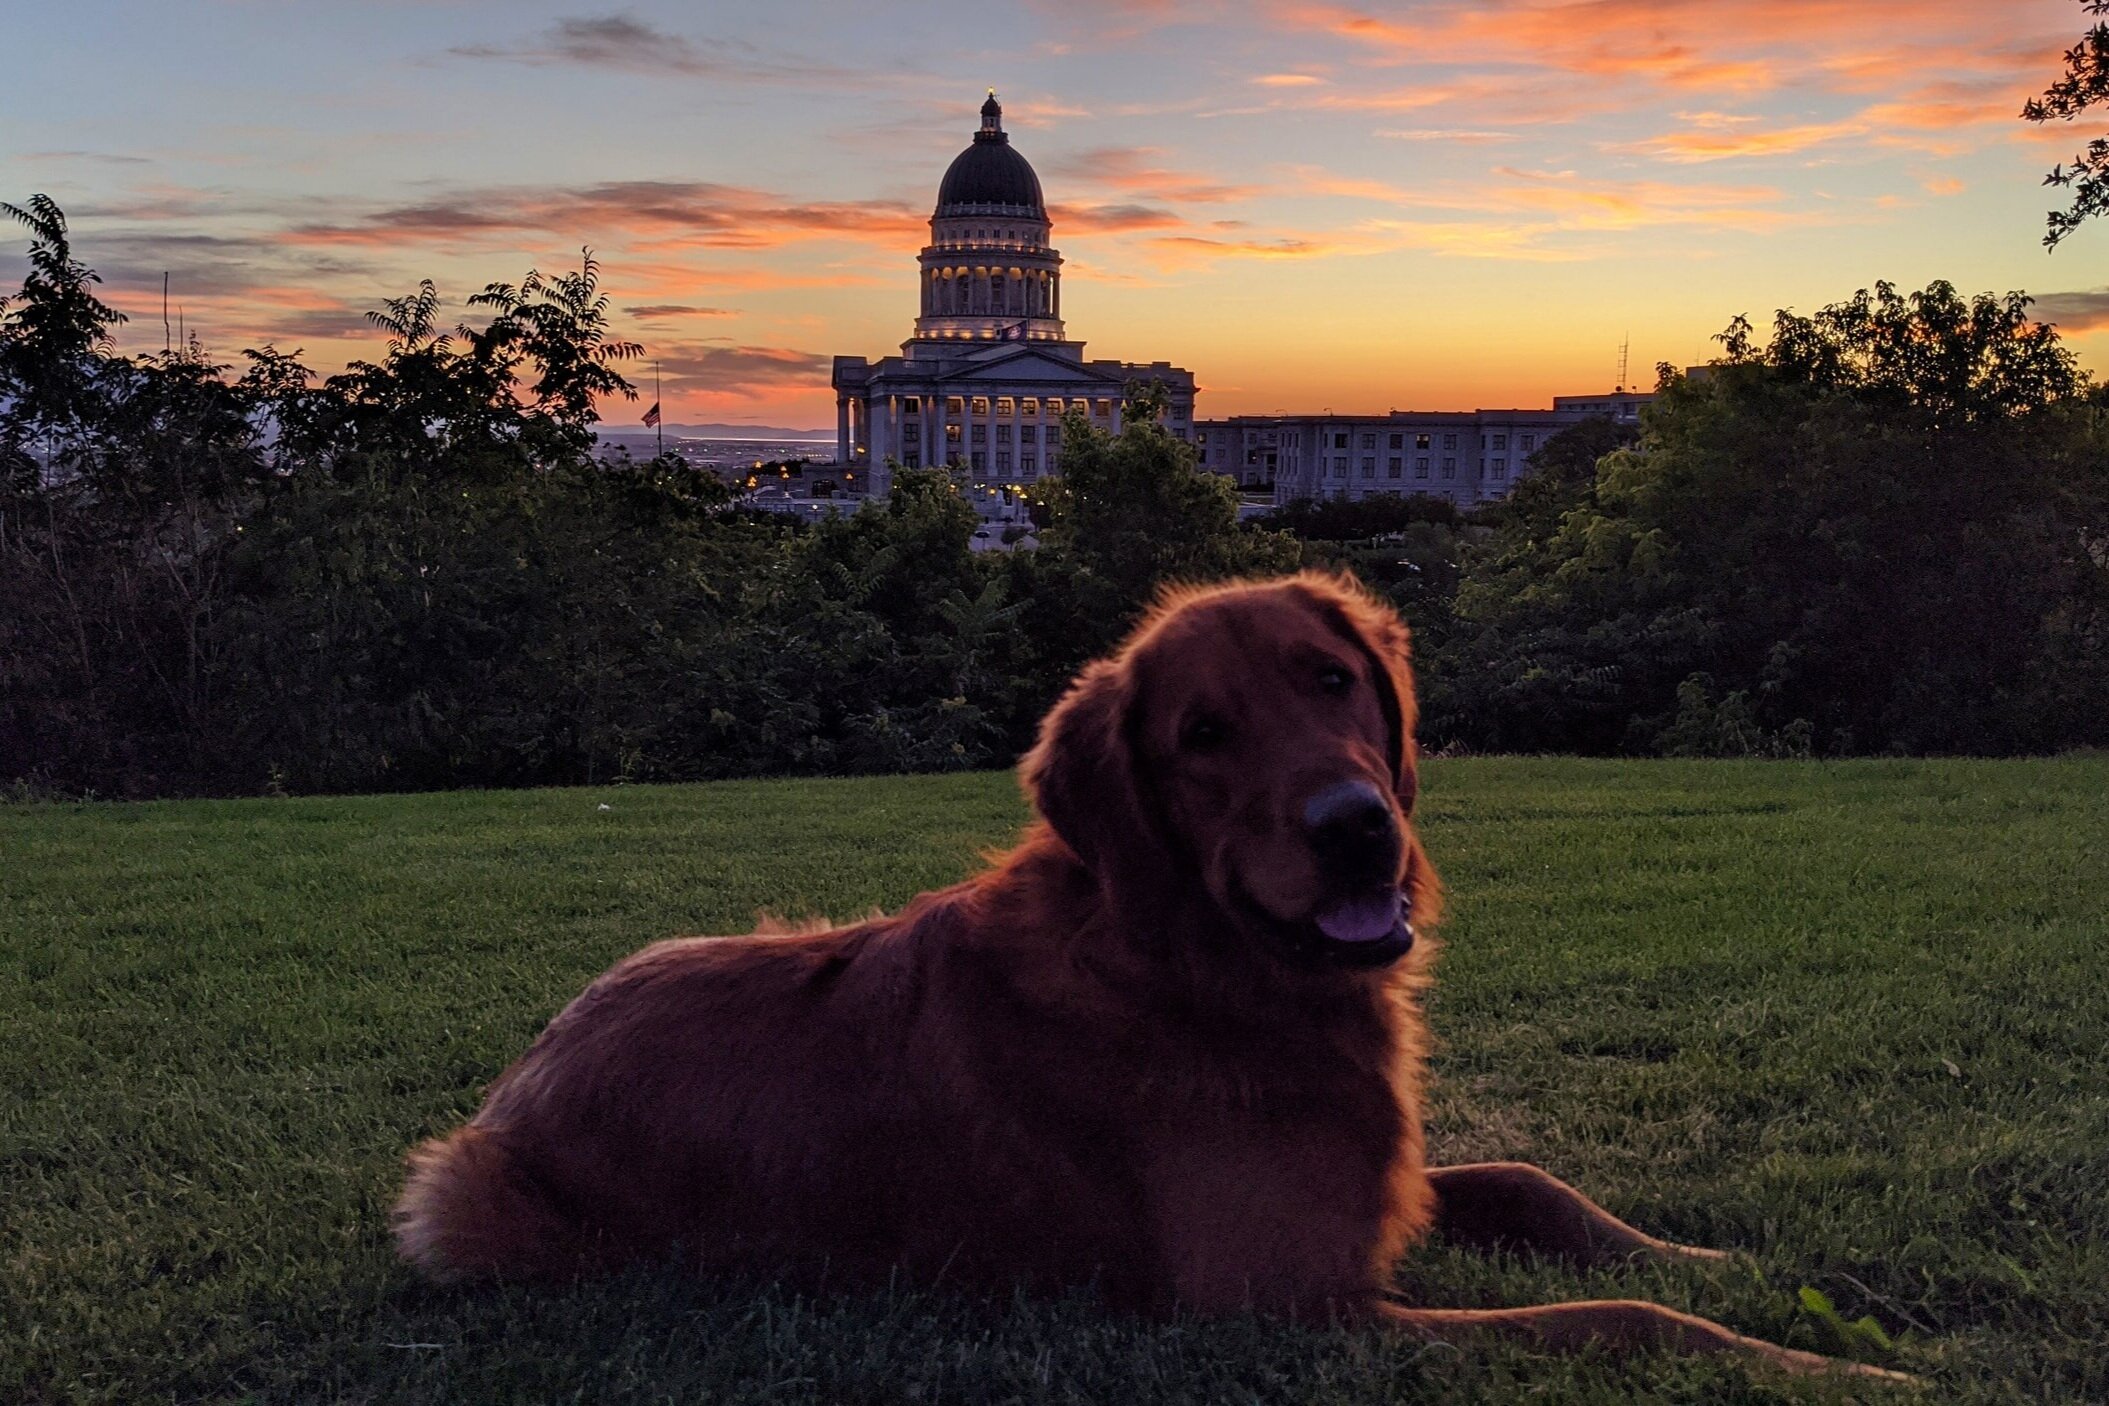 A golden retriever sits silhouetted in front of the Utah State Capitol at sunset